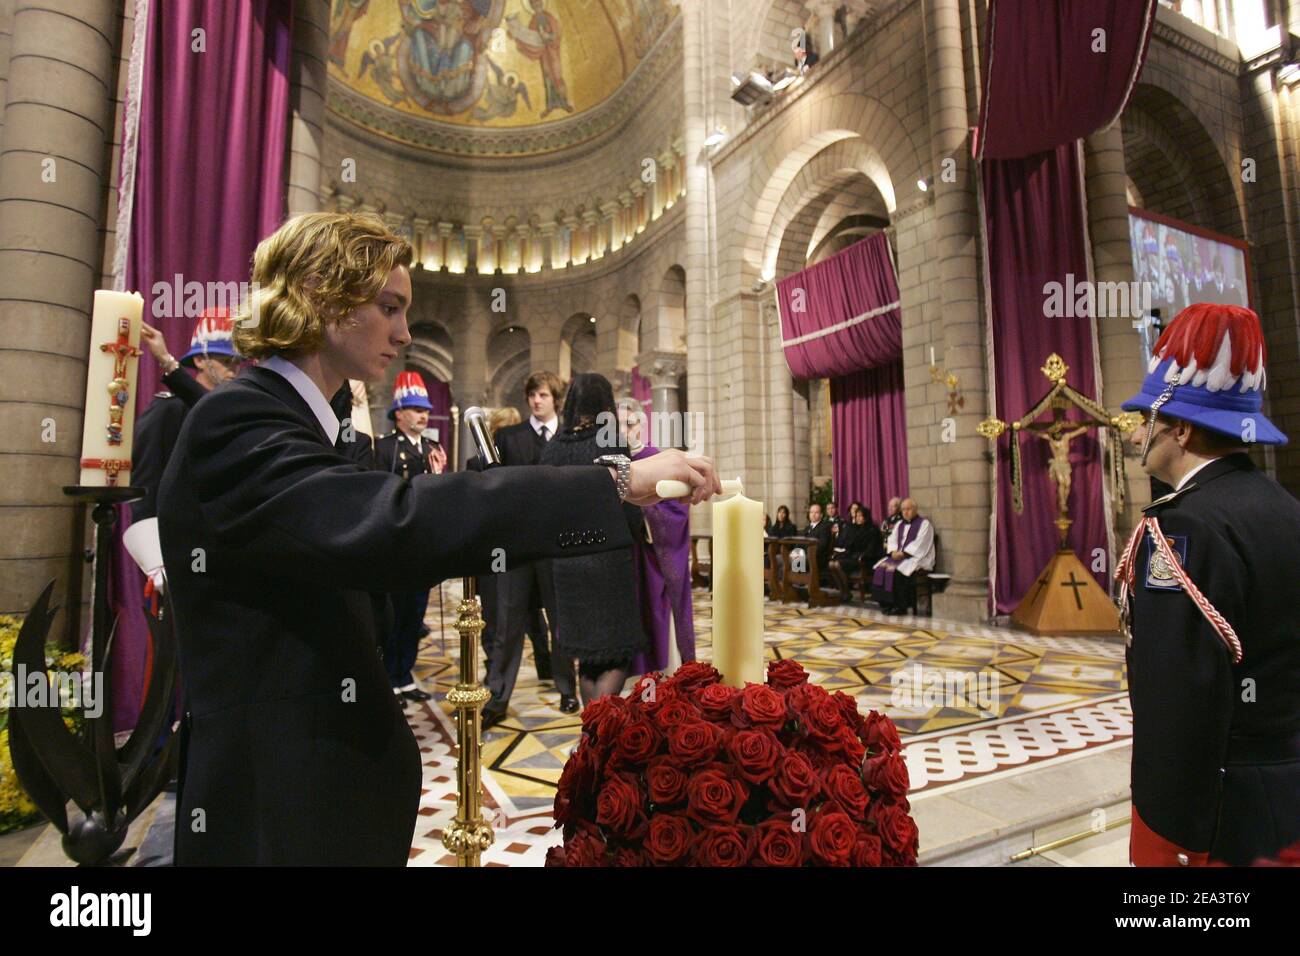 Pierre Casiraghi attends the funeral service for the late Prince Rainier III of Monaco at Saint Nicolas Cathedral in Monaco on April 15, 2005. Photo by Pool/ABACA Stock Photo